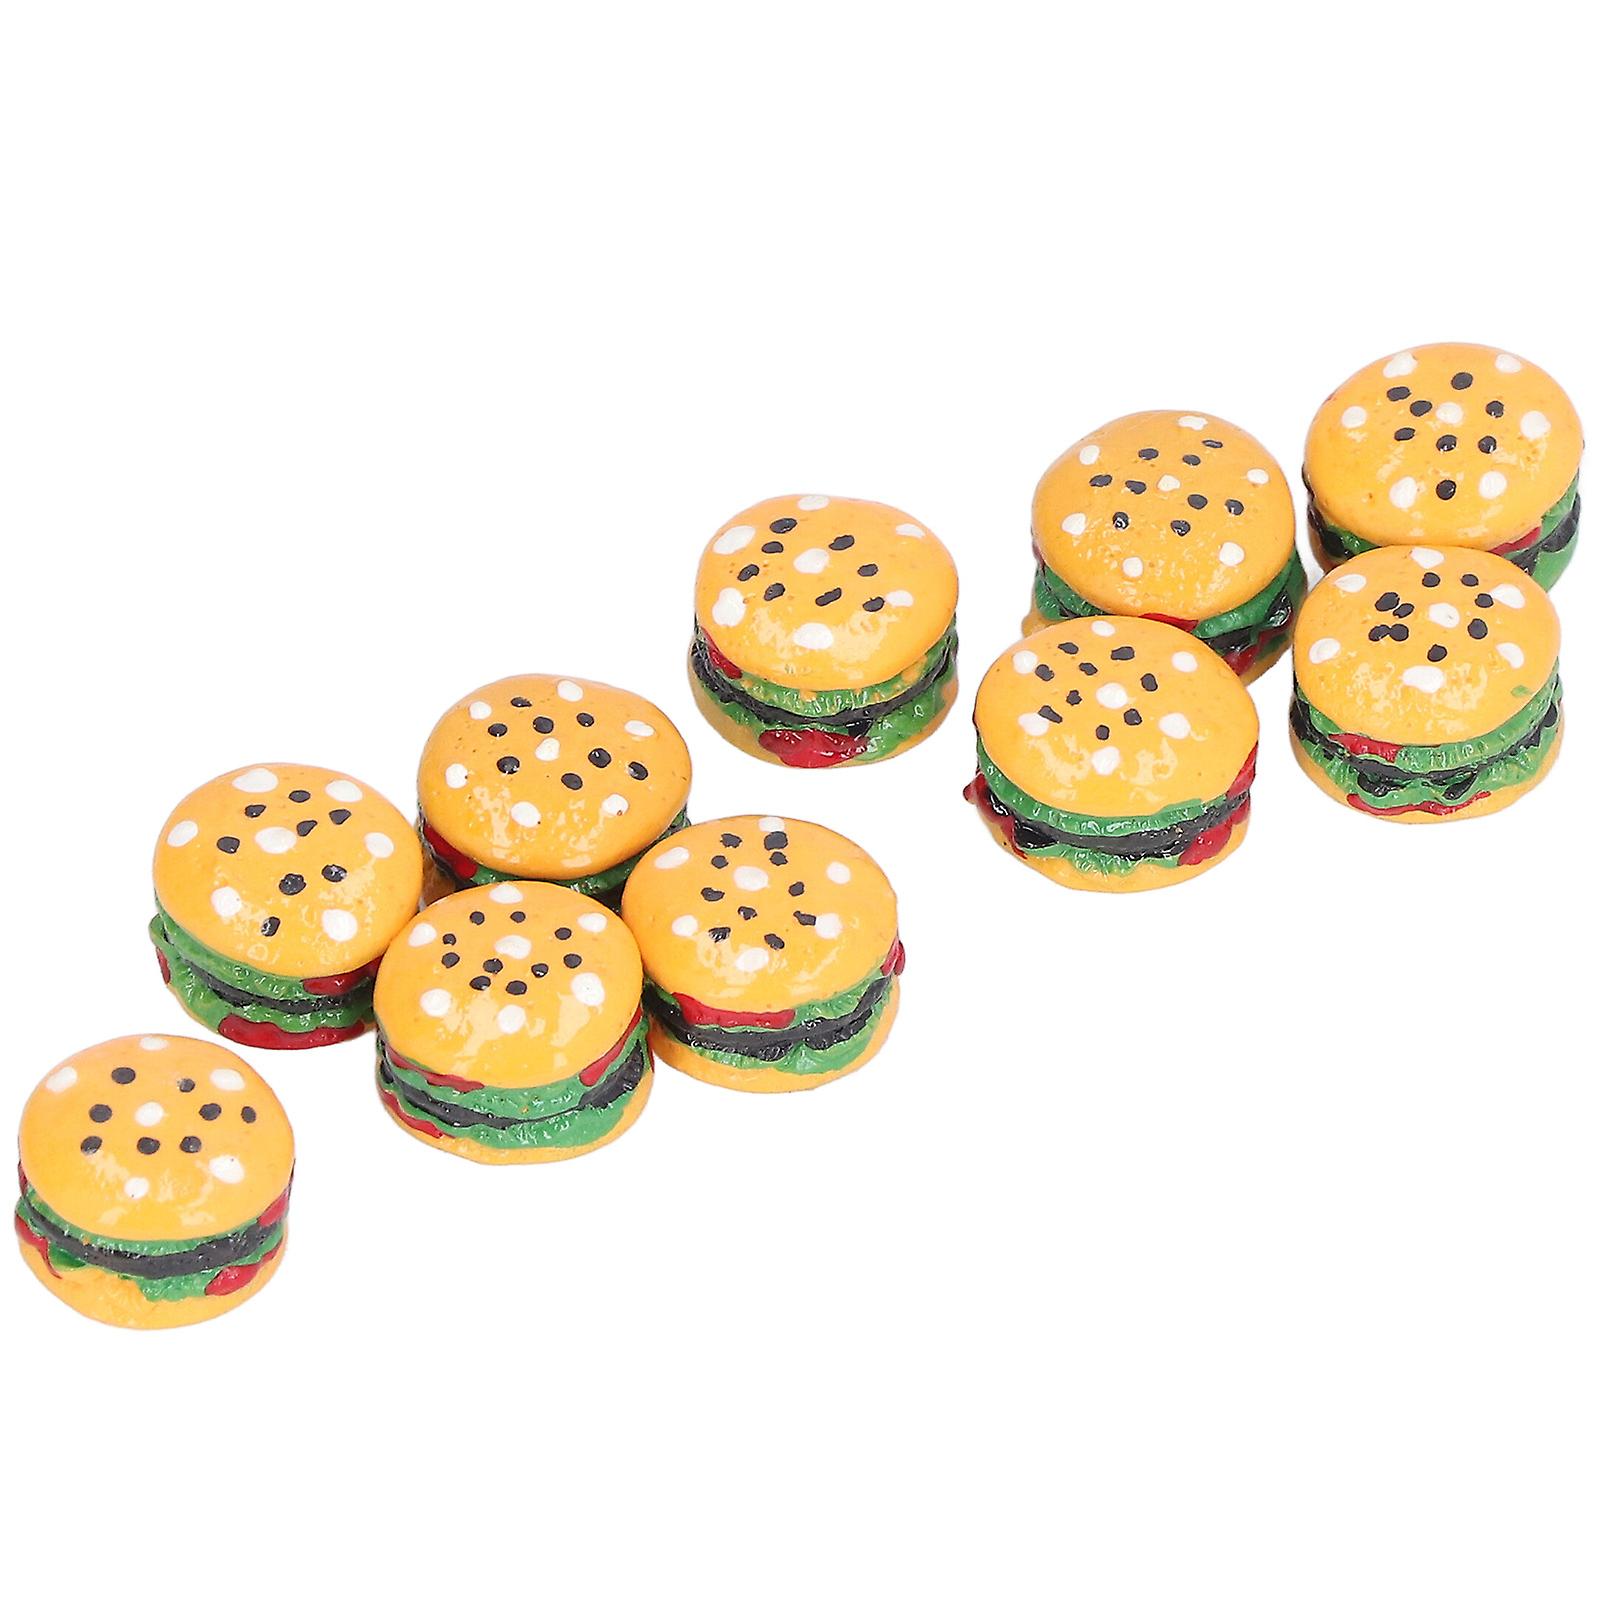 Miniature Food Play Burger Model Kids Hamburger Toys 1/12 Dollhouse Accessories For Kids 3 Years Old +